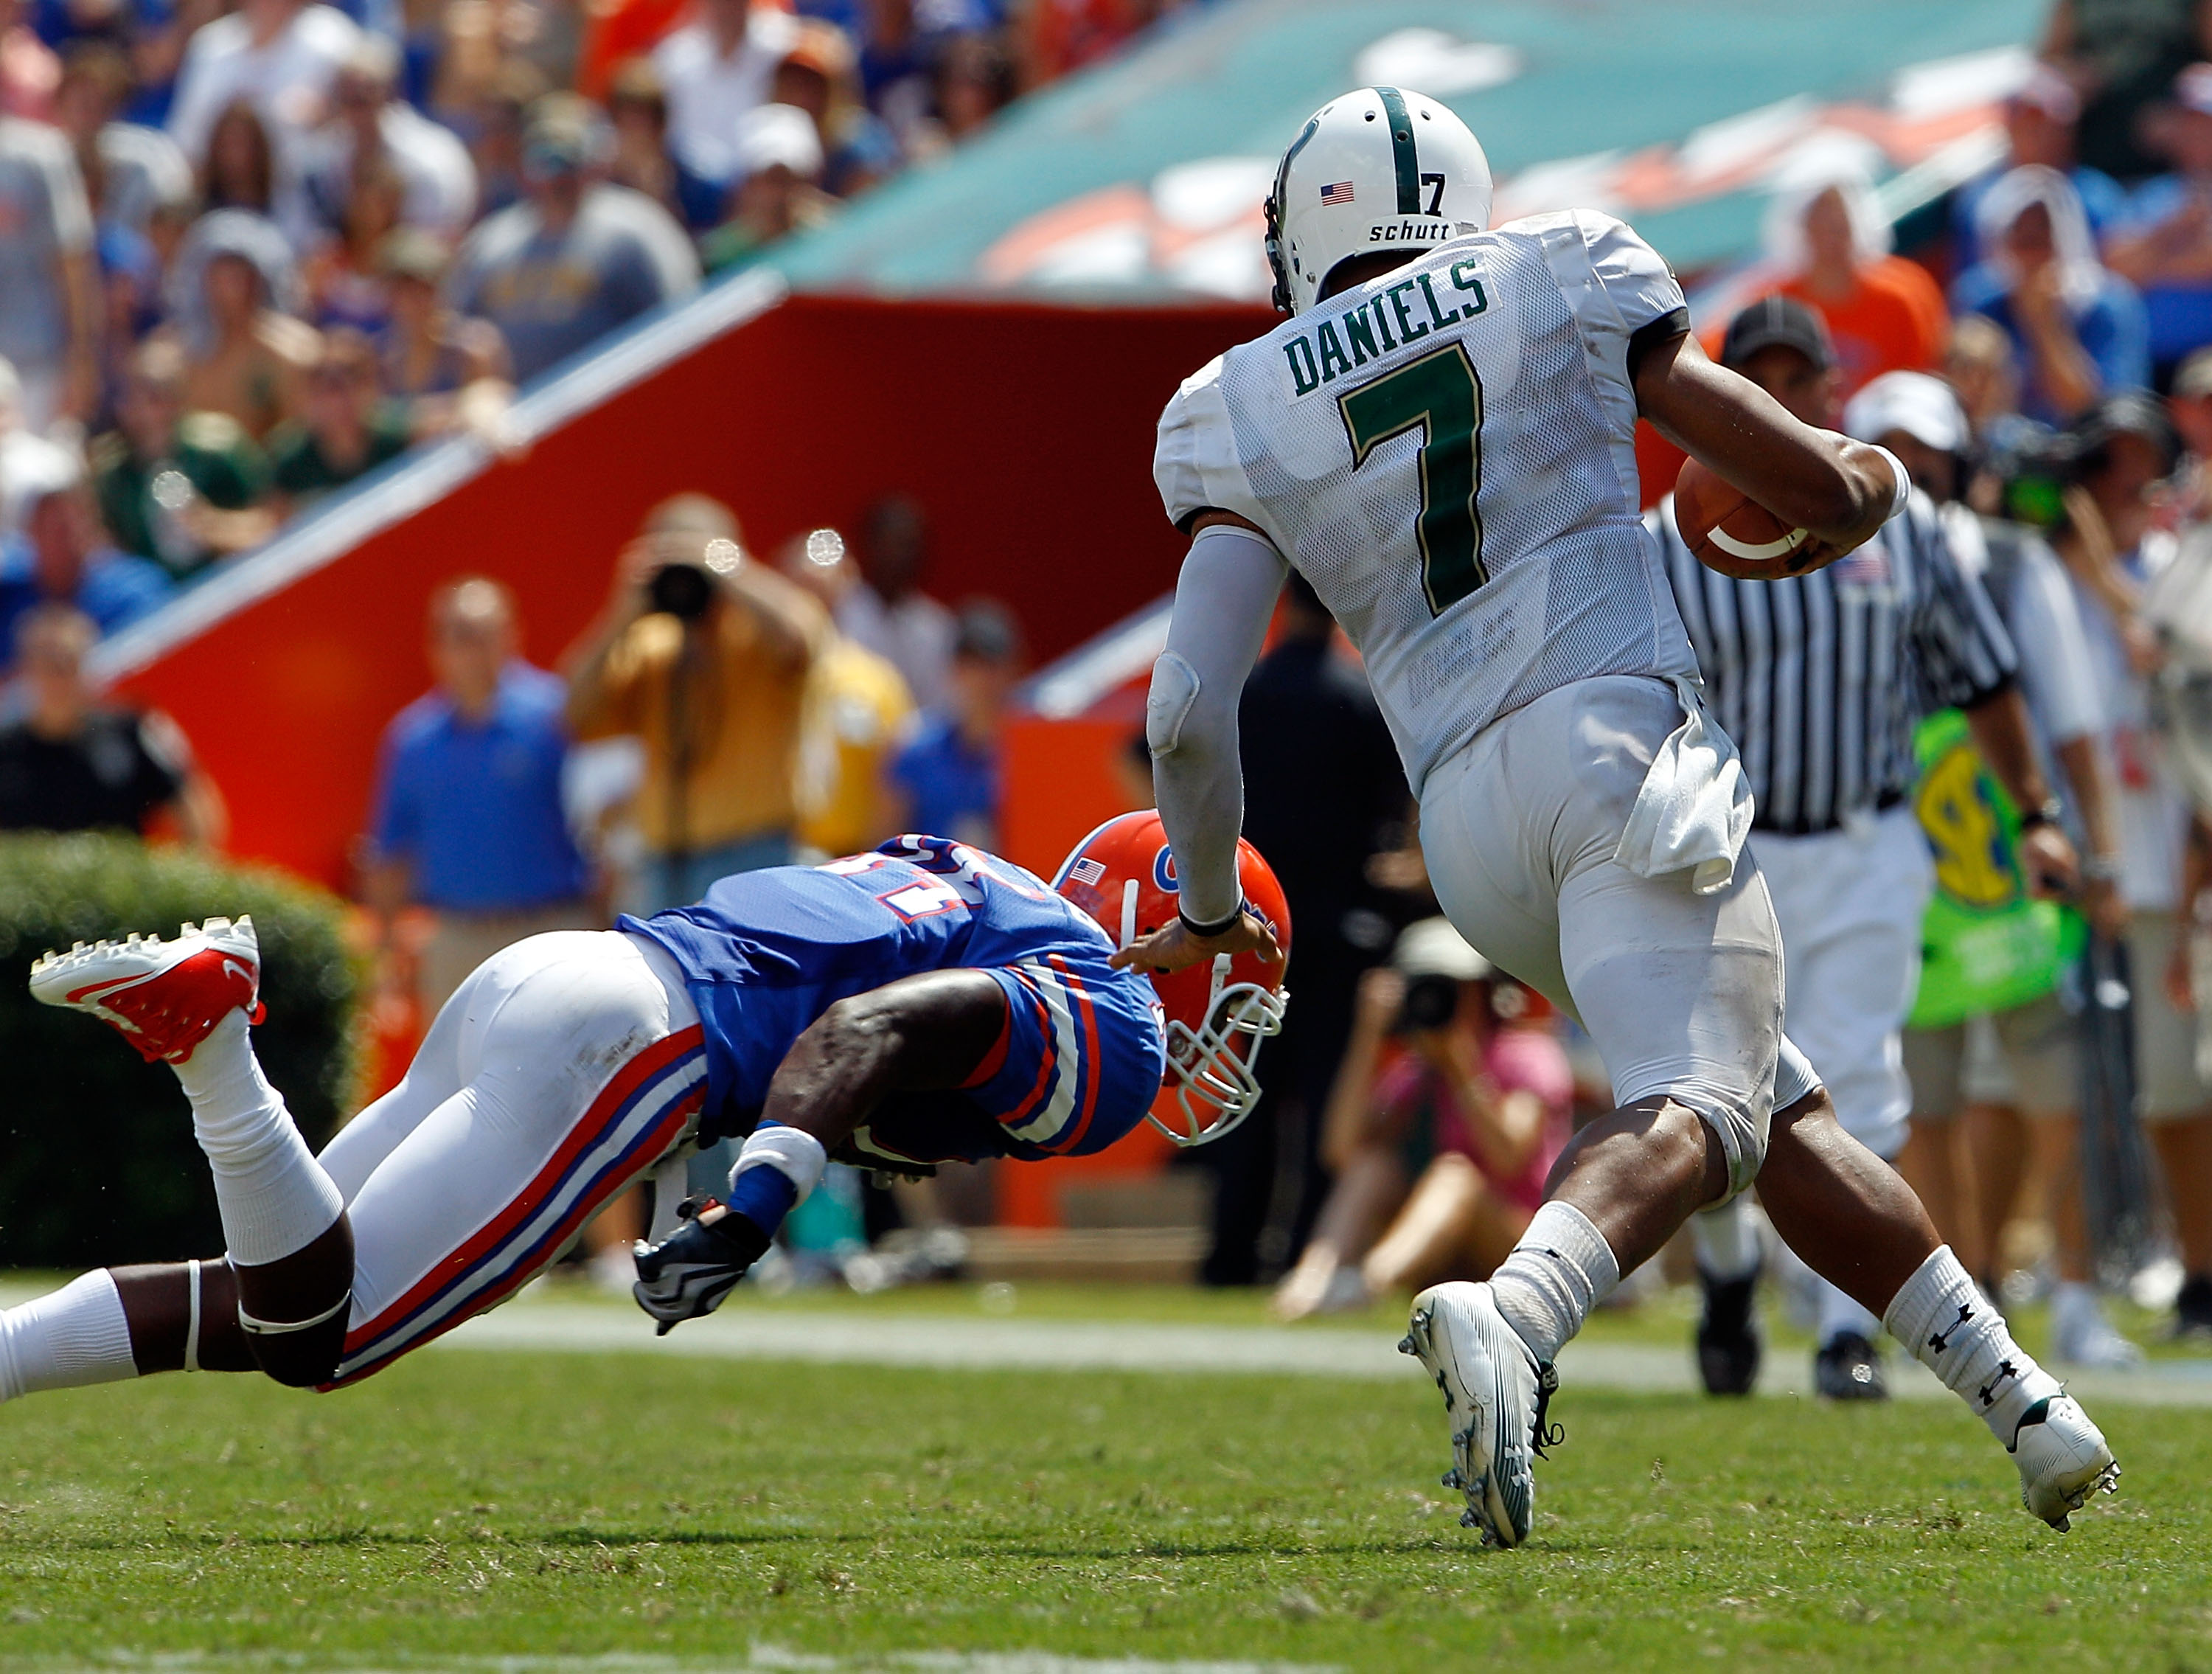 GAINESVILLE, FL - SEPTEMBER 11:  Brandon Hicks #40 of the Florida Gators attempts to tackle B.J. Daniels #7 of the South Florida Bulls during a game at Ben Hill Griffin Stadium on September 11, 2010 in Gainesville, Florida.  (Photo by Sam Greenwood/Getty 